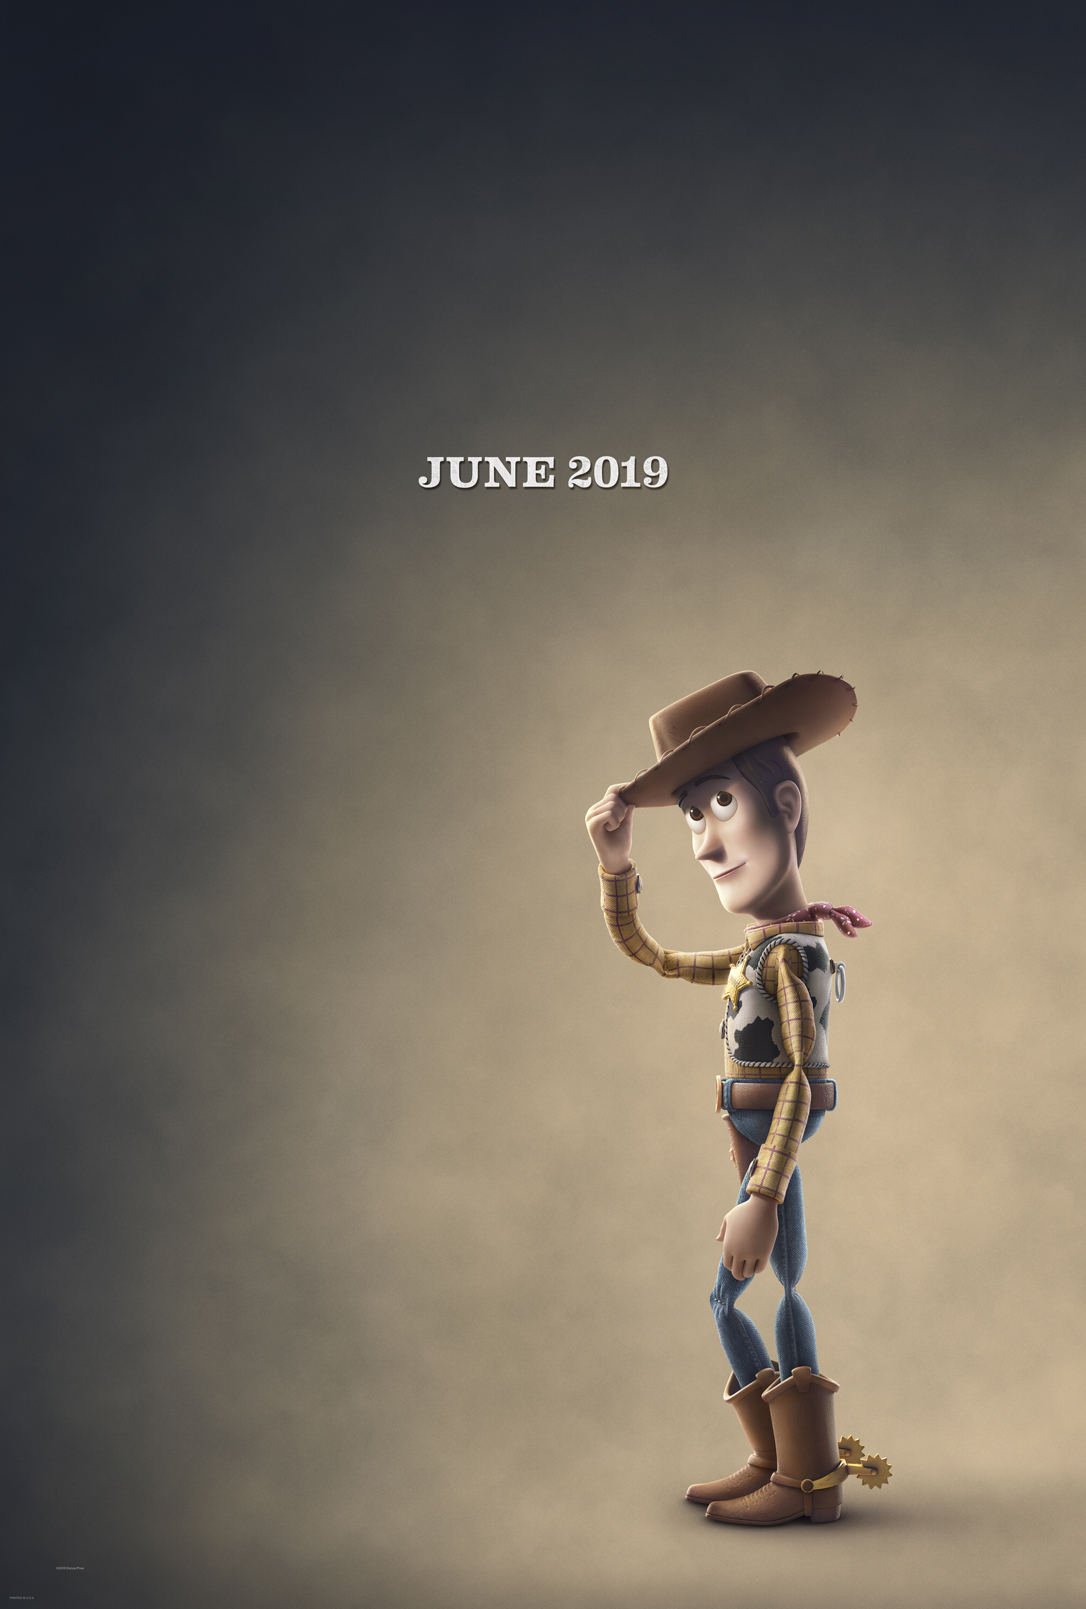 Toy Story 4 Teaser Trailer And Poster Released Allearsnet